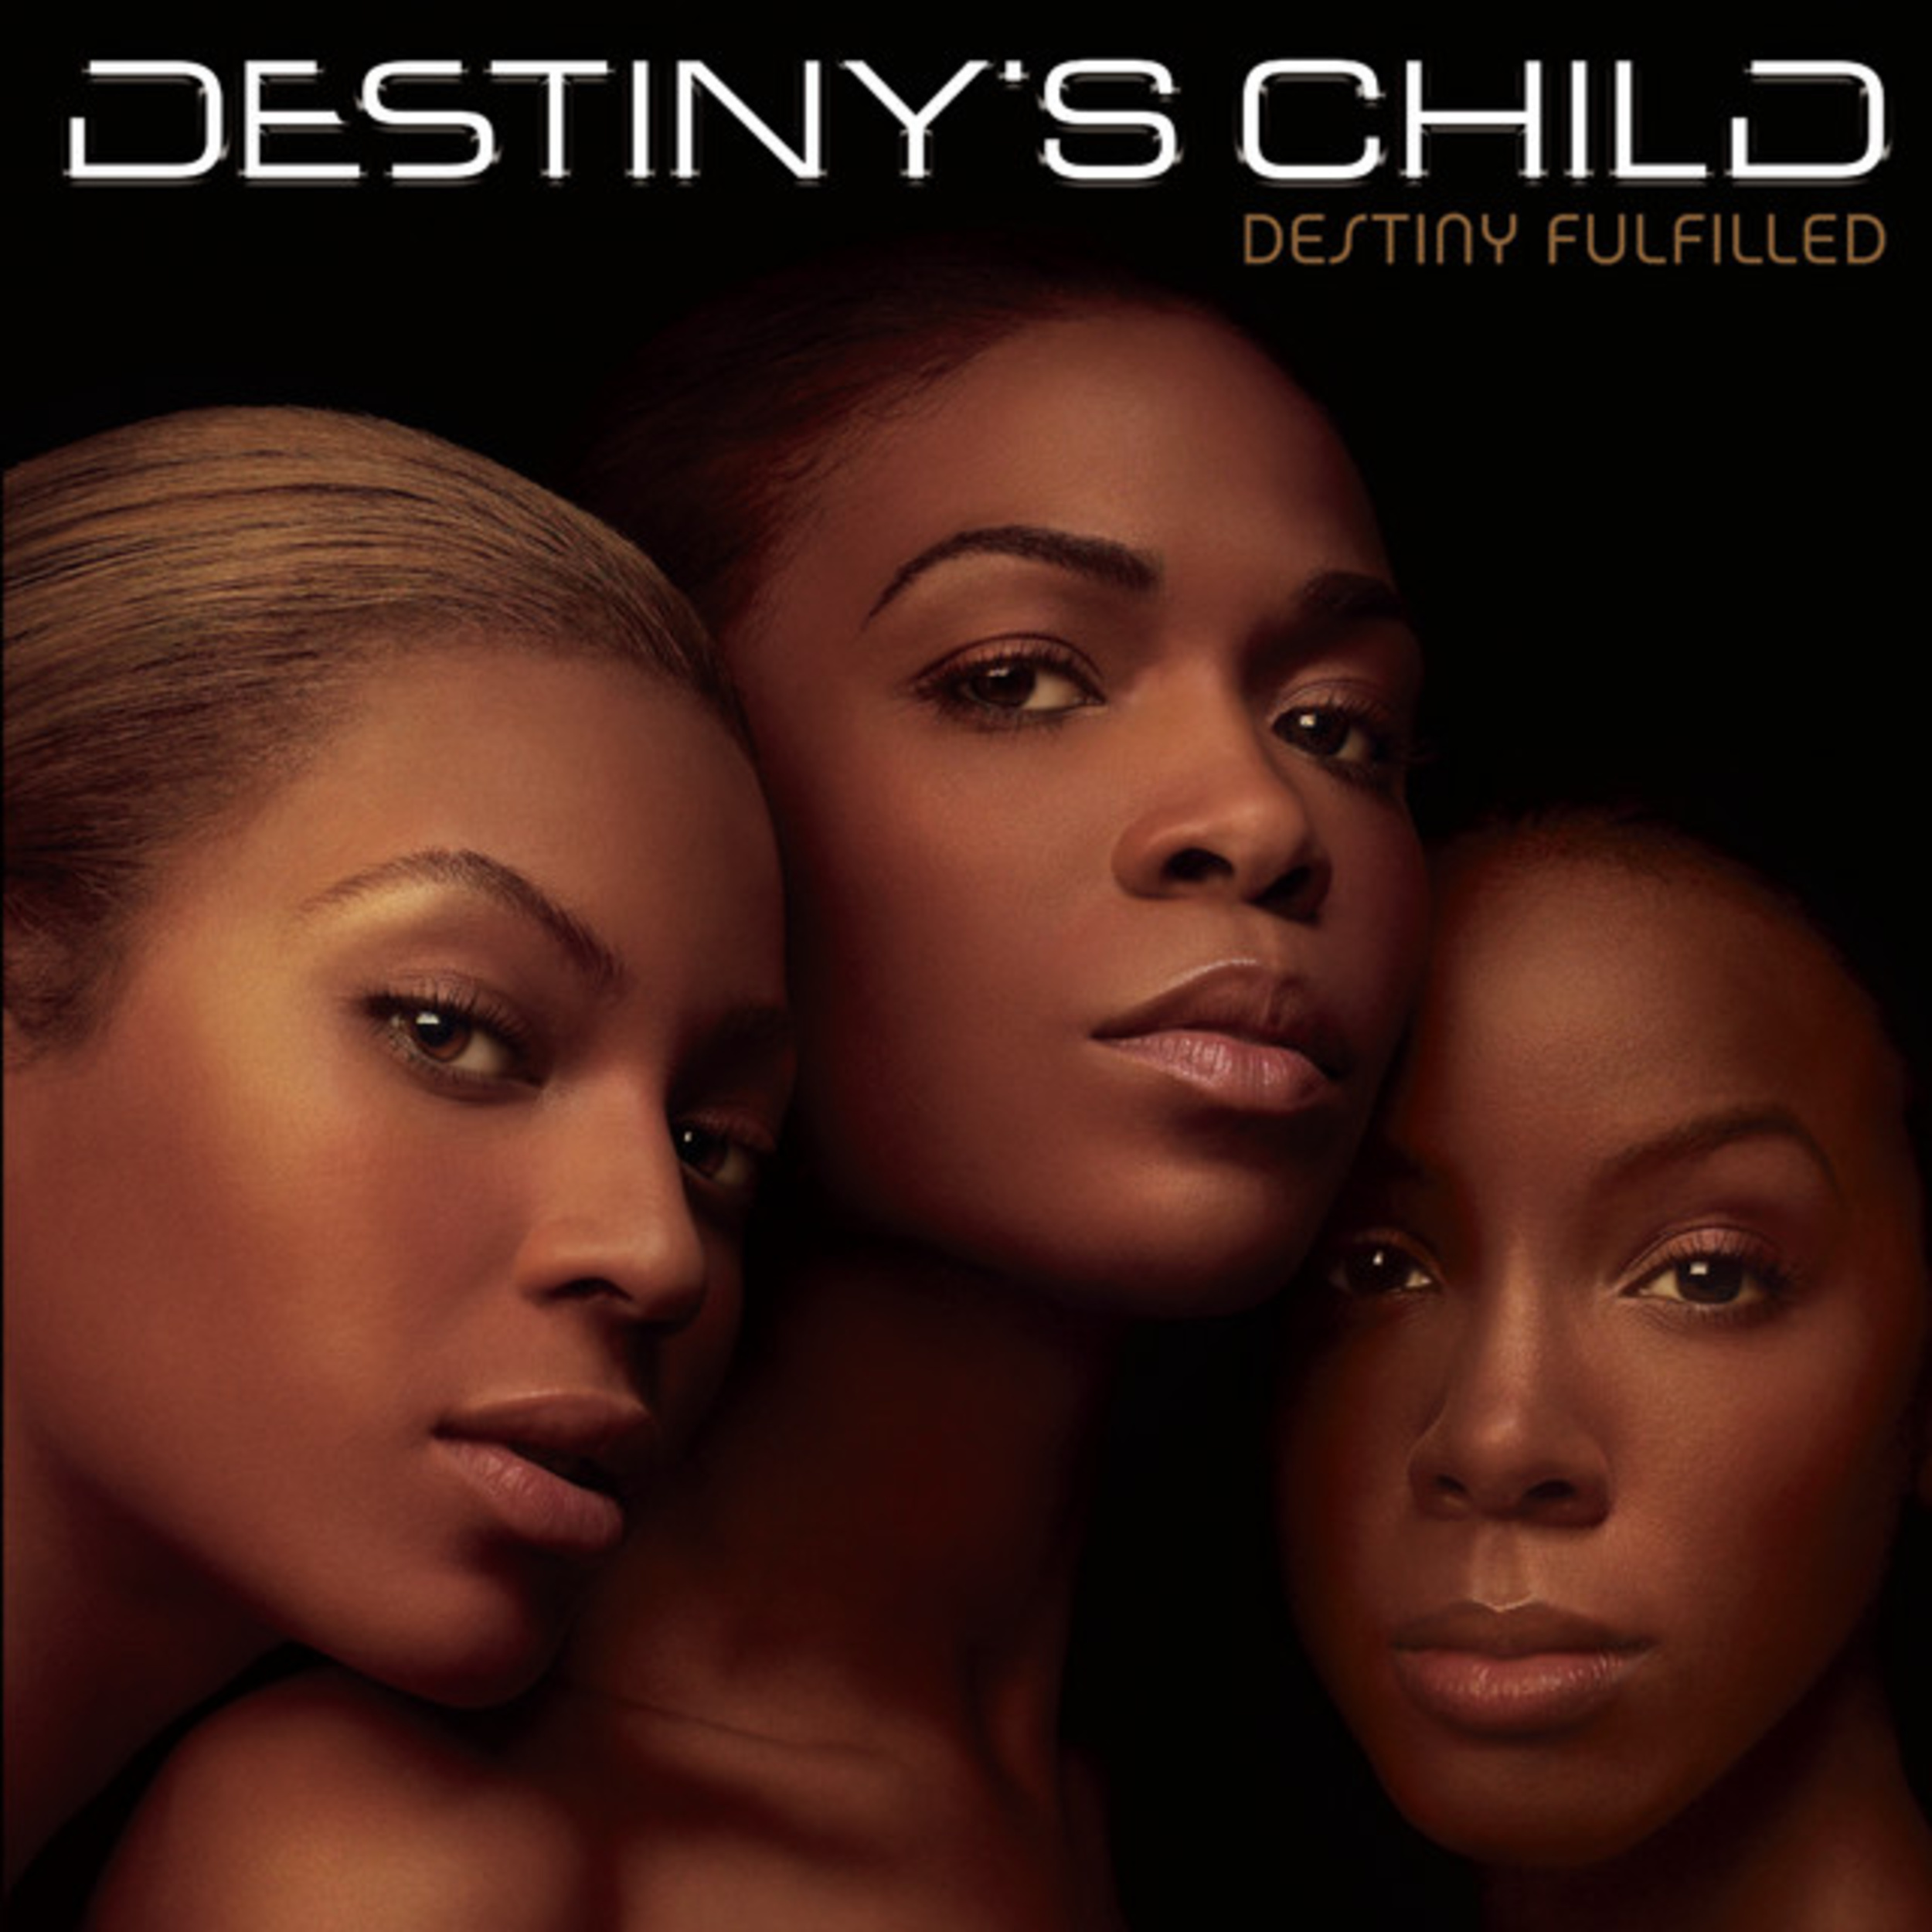 <p><em>Destiny Fulfilled</em> marks the final album released by Destiny's Child, marking the end of the group but a new beginning for the members' solo careers. The trio teamed up with a number of producers, including Rodney Jerkins, Sean Garrett, Rich Harrison, 9th Wonder, Rockwilder, and more. The album included four singles such as <a href="https://www.youtube.com/watch?v=AqeIiF0DlTg">"Lose My Breath,"</a> "Soldier," and "Cater 2 U." </p><p>You may also like: <a href='https://www.yardbarker.com/entertainment/articles/the_essential_country_music_road_trip_playlist_031824/s1__39196601'>The essential country music road trip playlist</a></p>